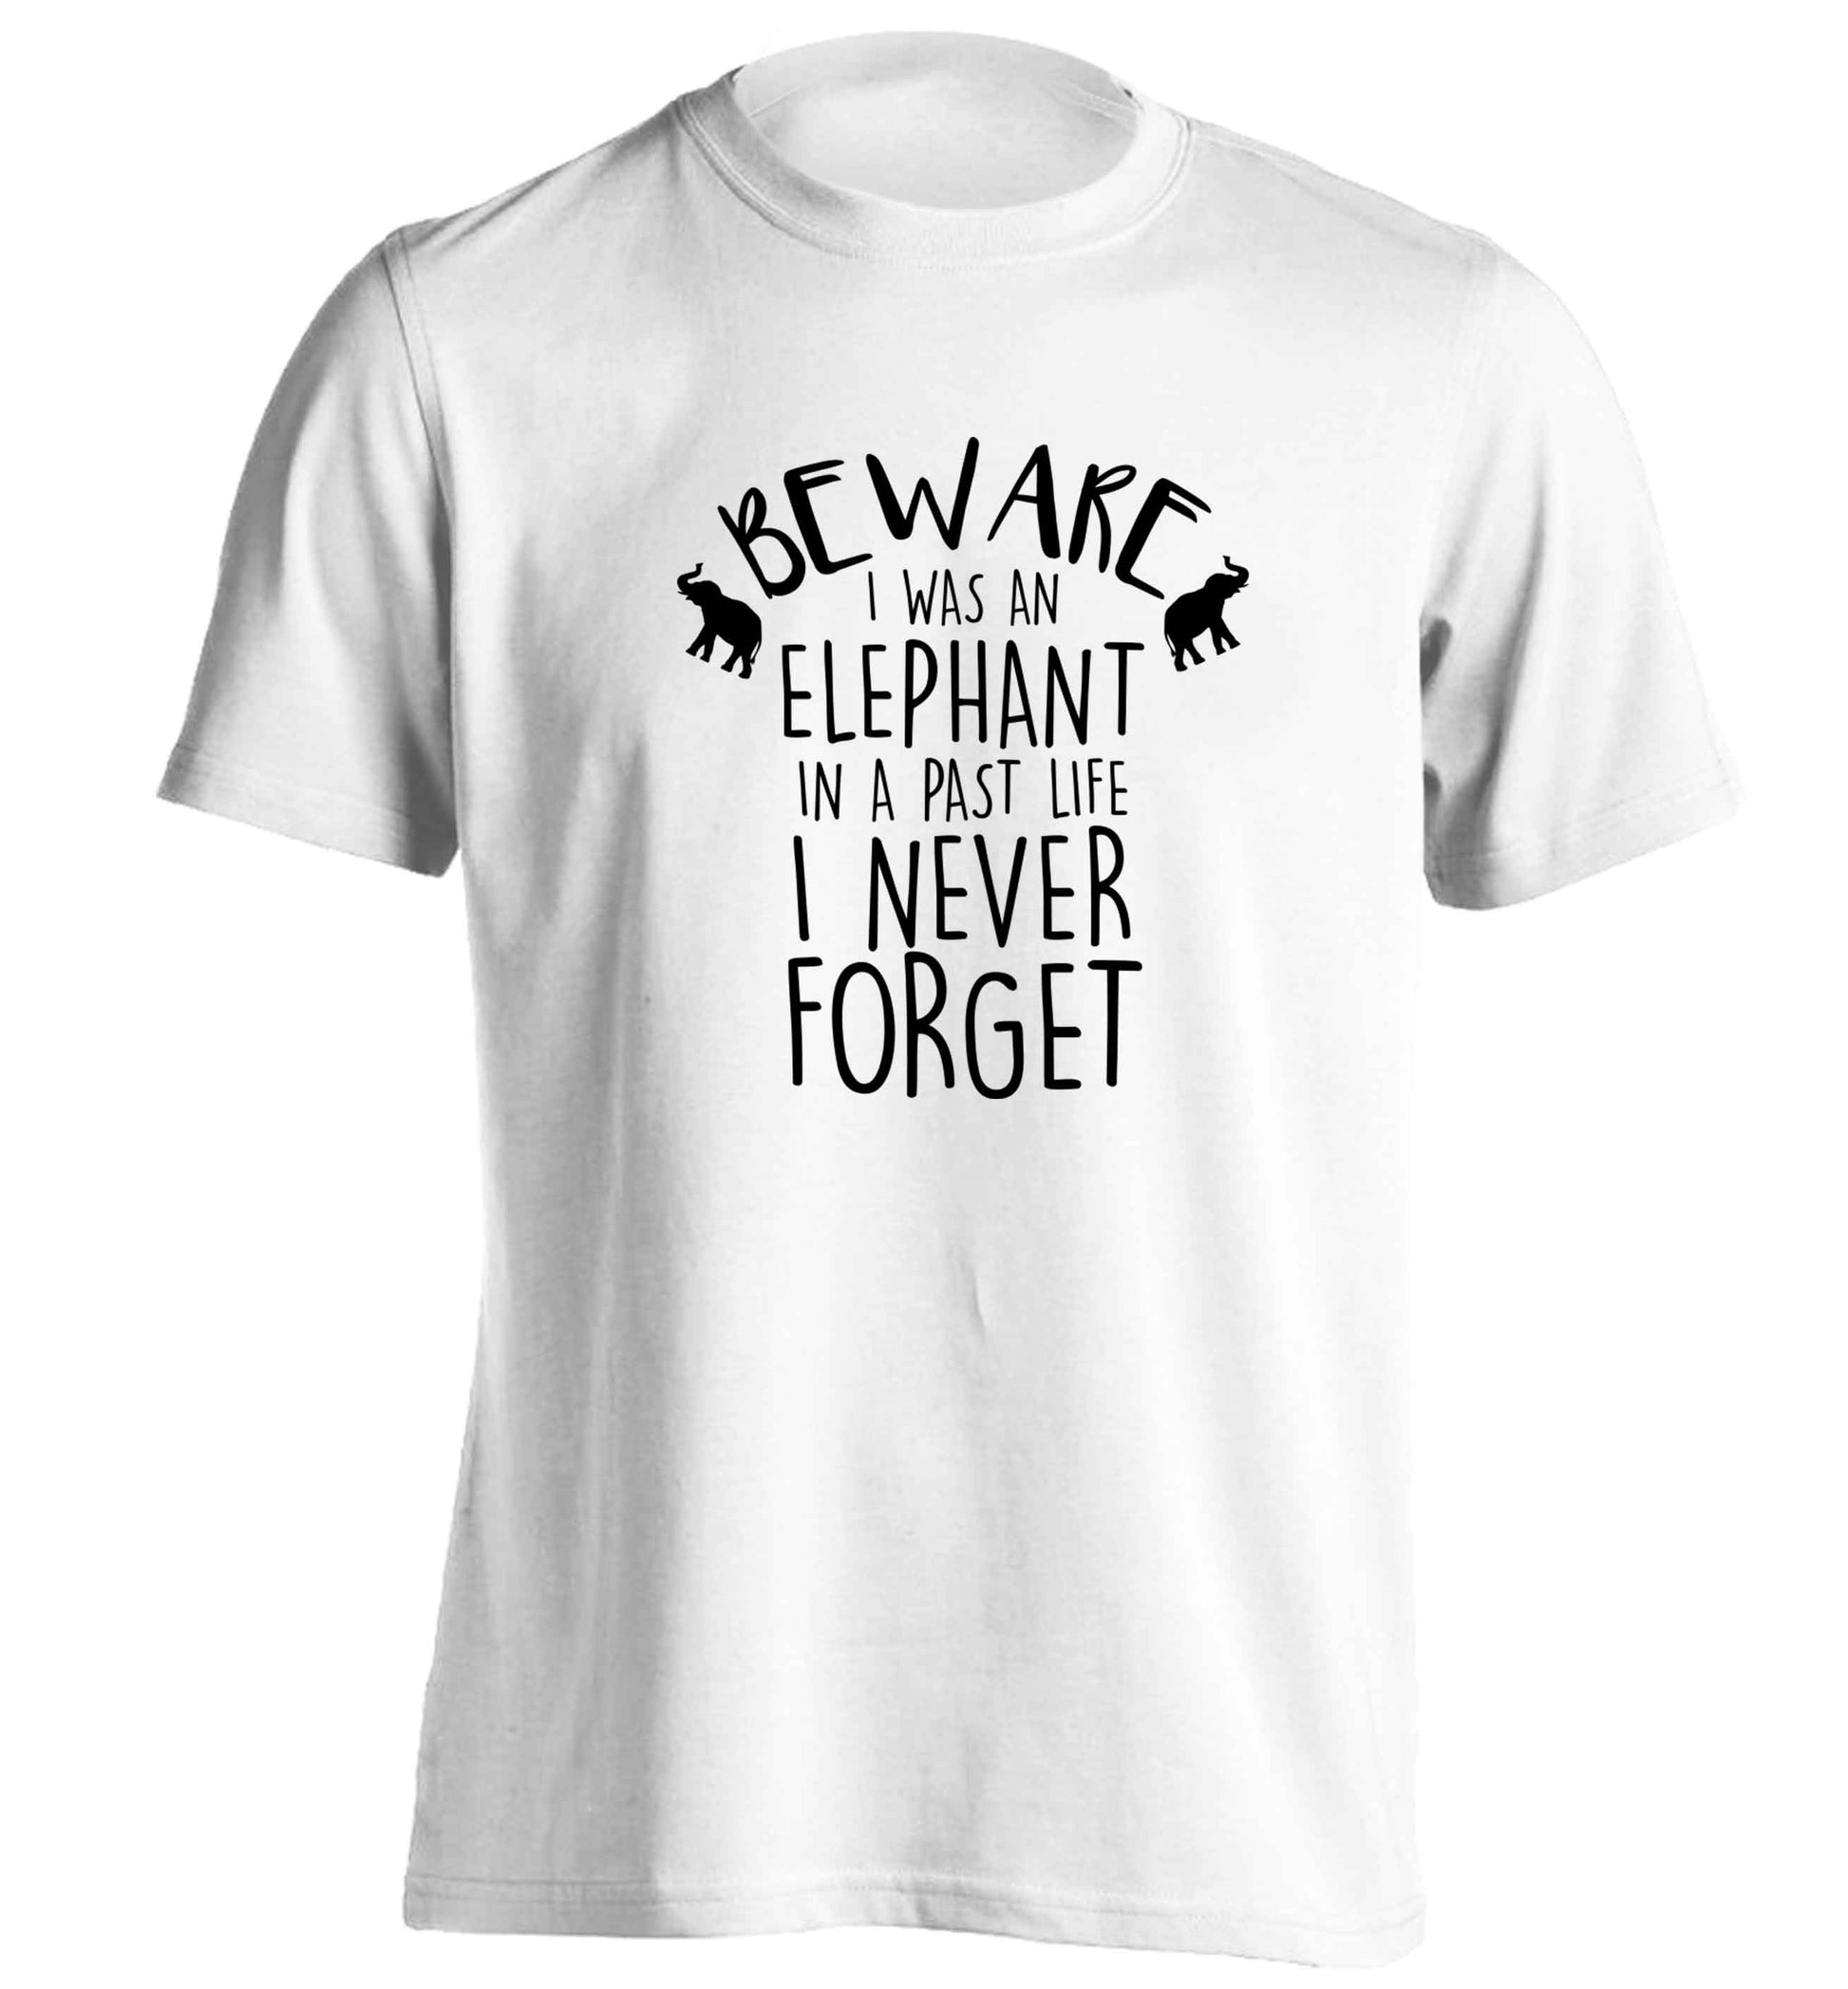 Beware I was an elephant in my past life I never forget adults unisex white Tshirt 2XL